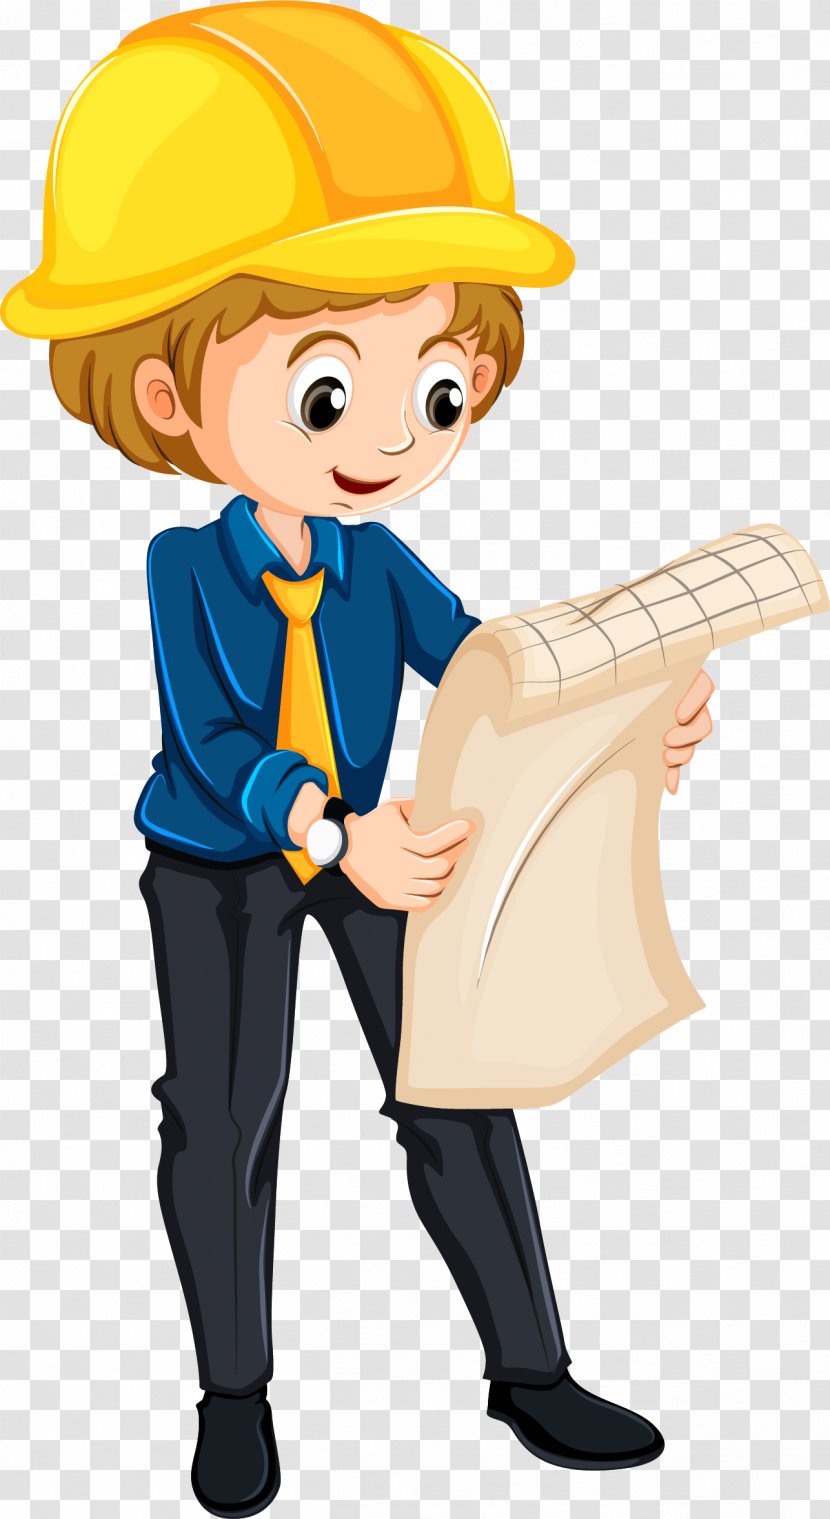 Engineering Clip Art - Mechanical - Holding The Drawings Of Engineers Transparent PNG